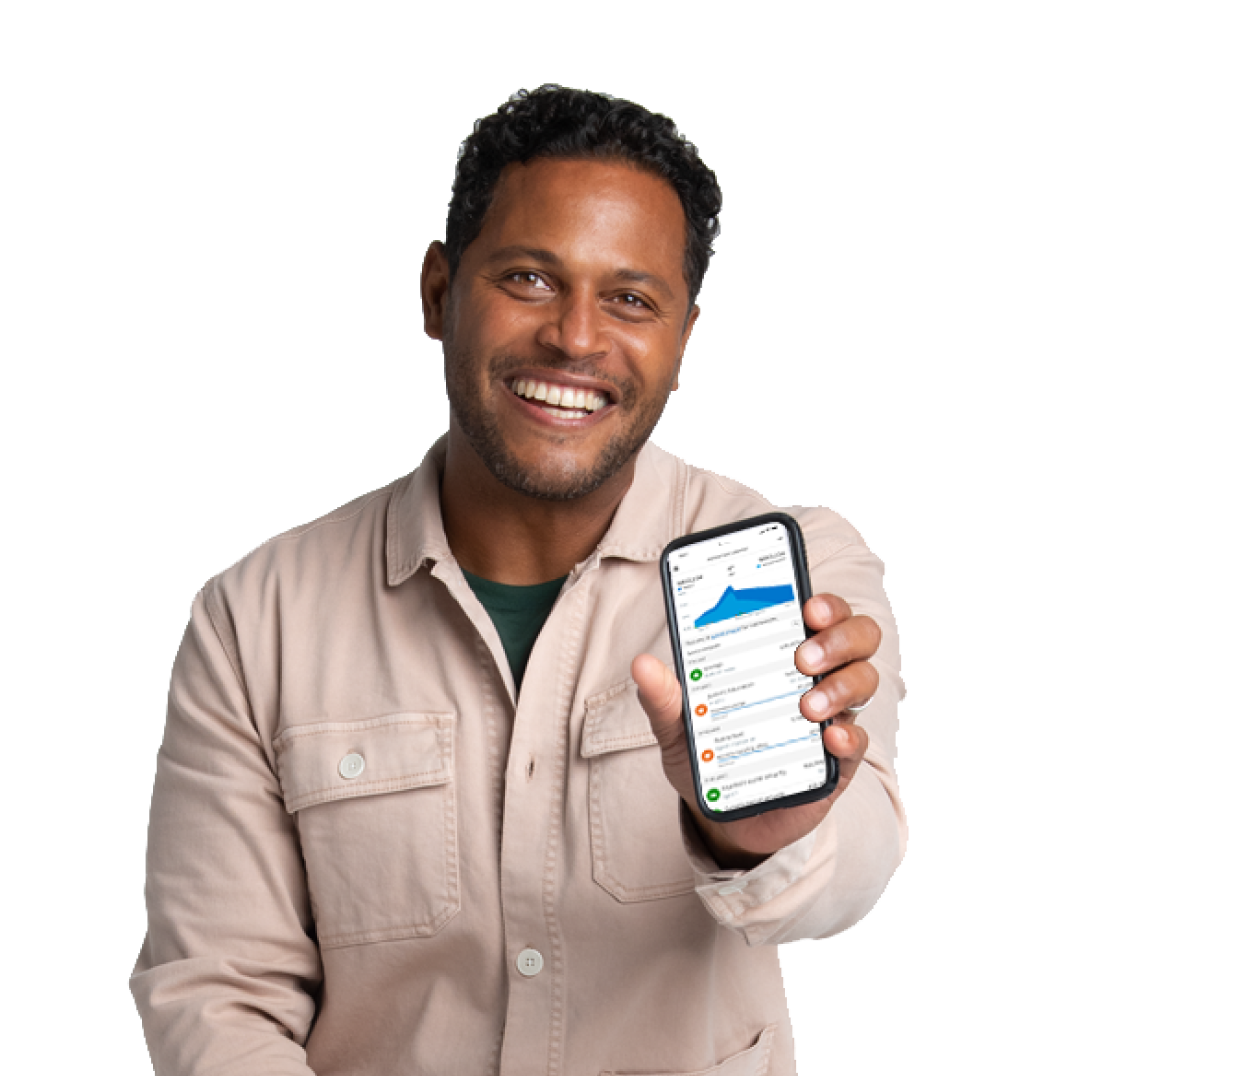 man with button-up shirt smiling holding a smartphone